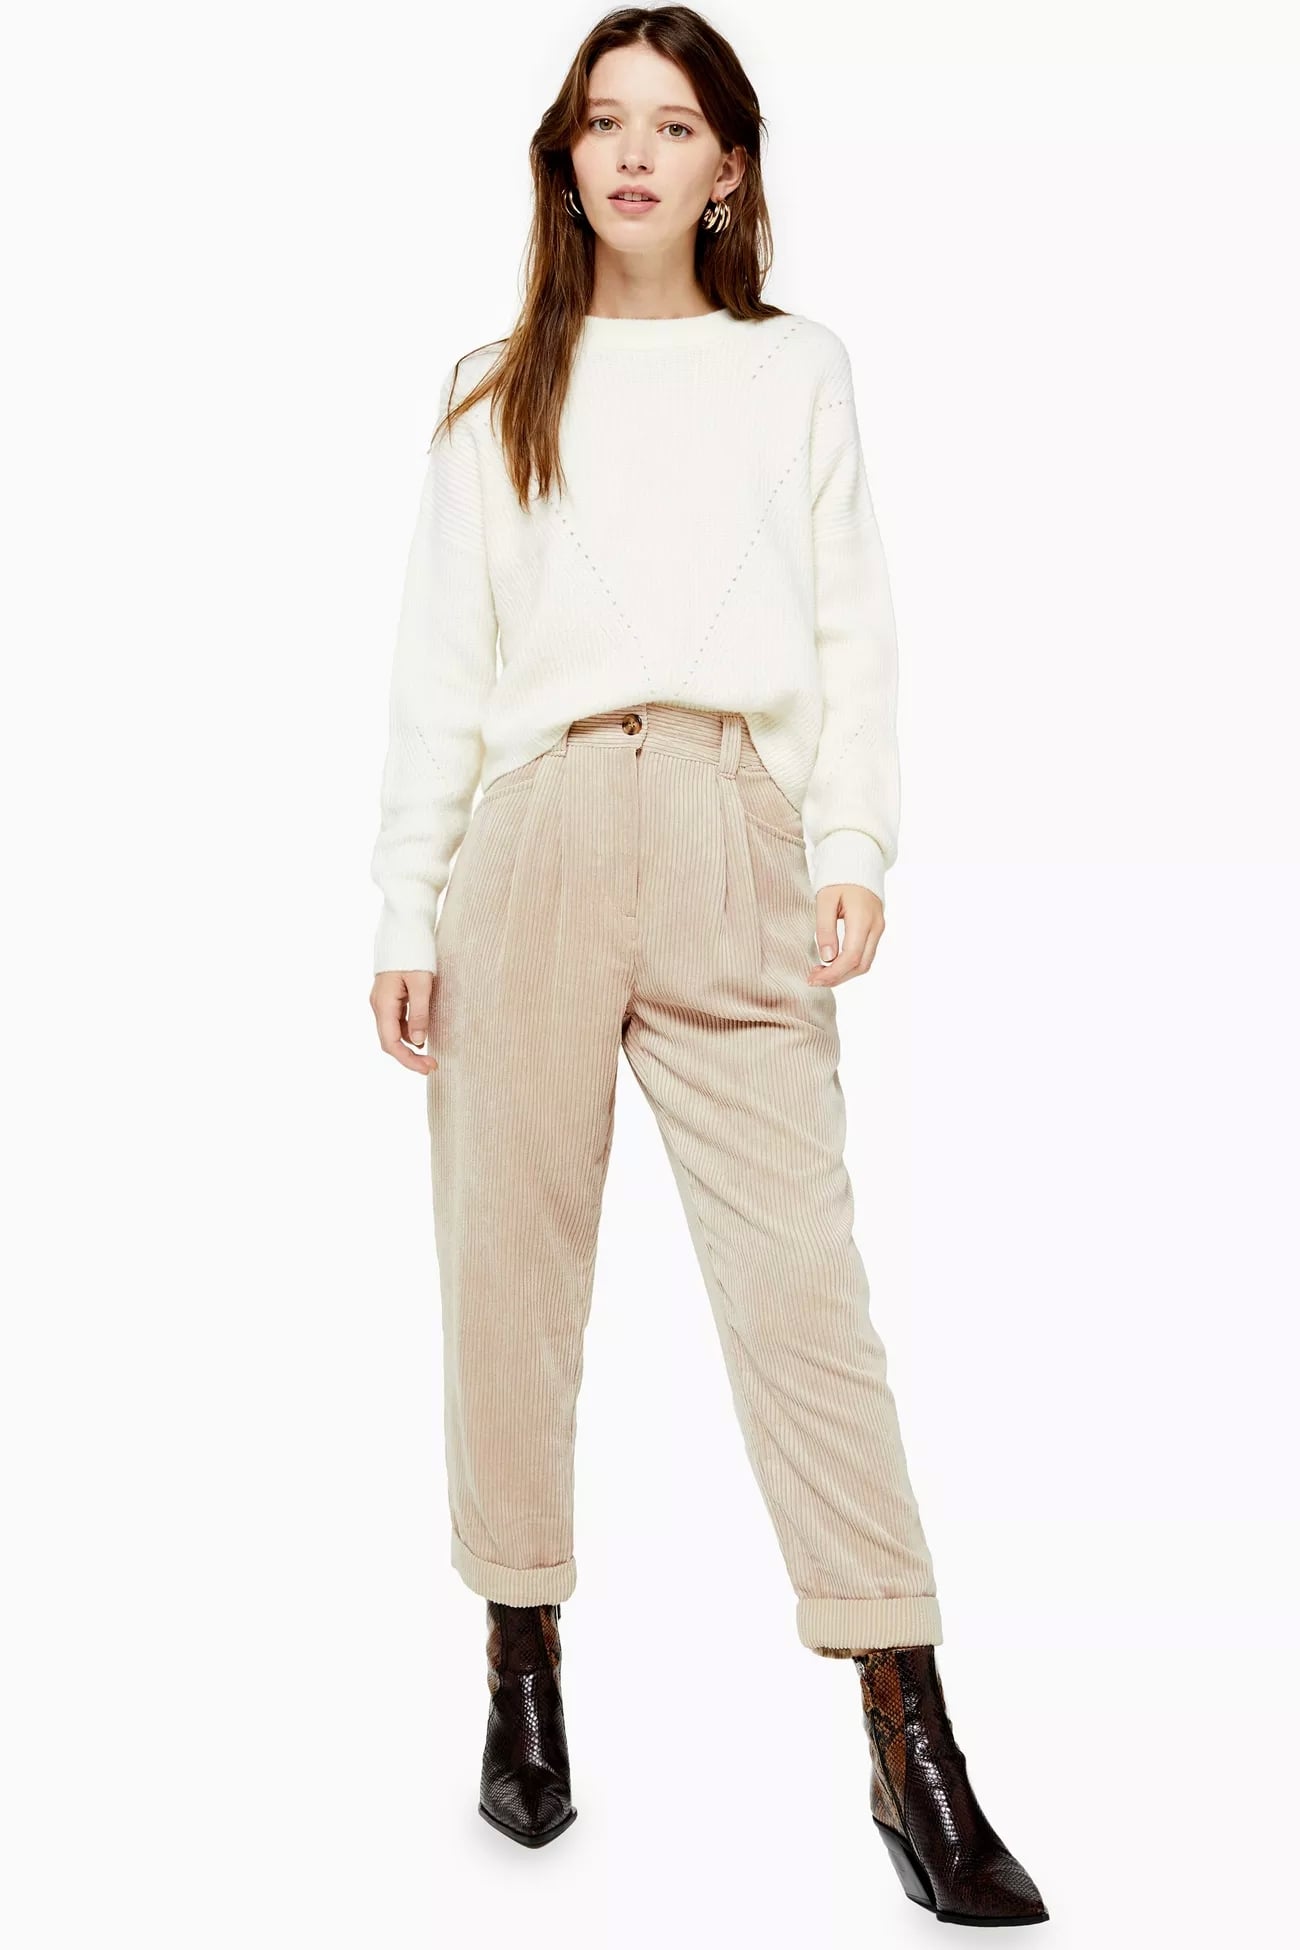 white corduroy pants outfit